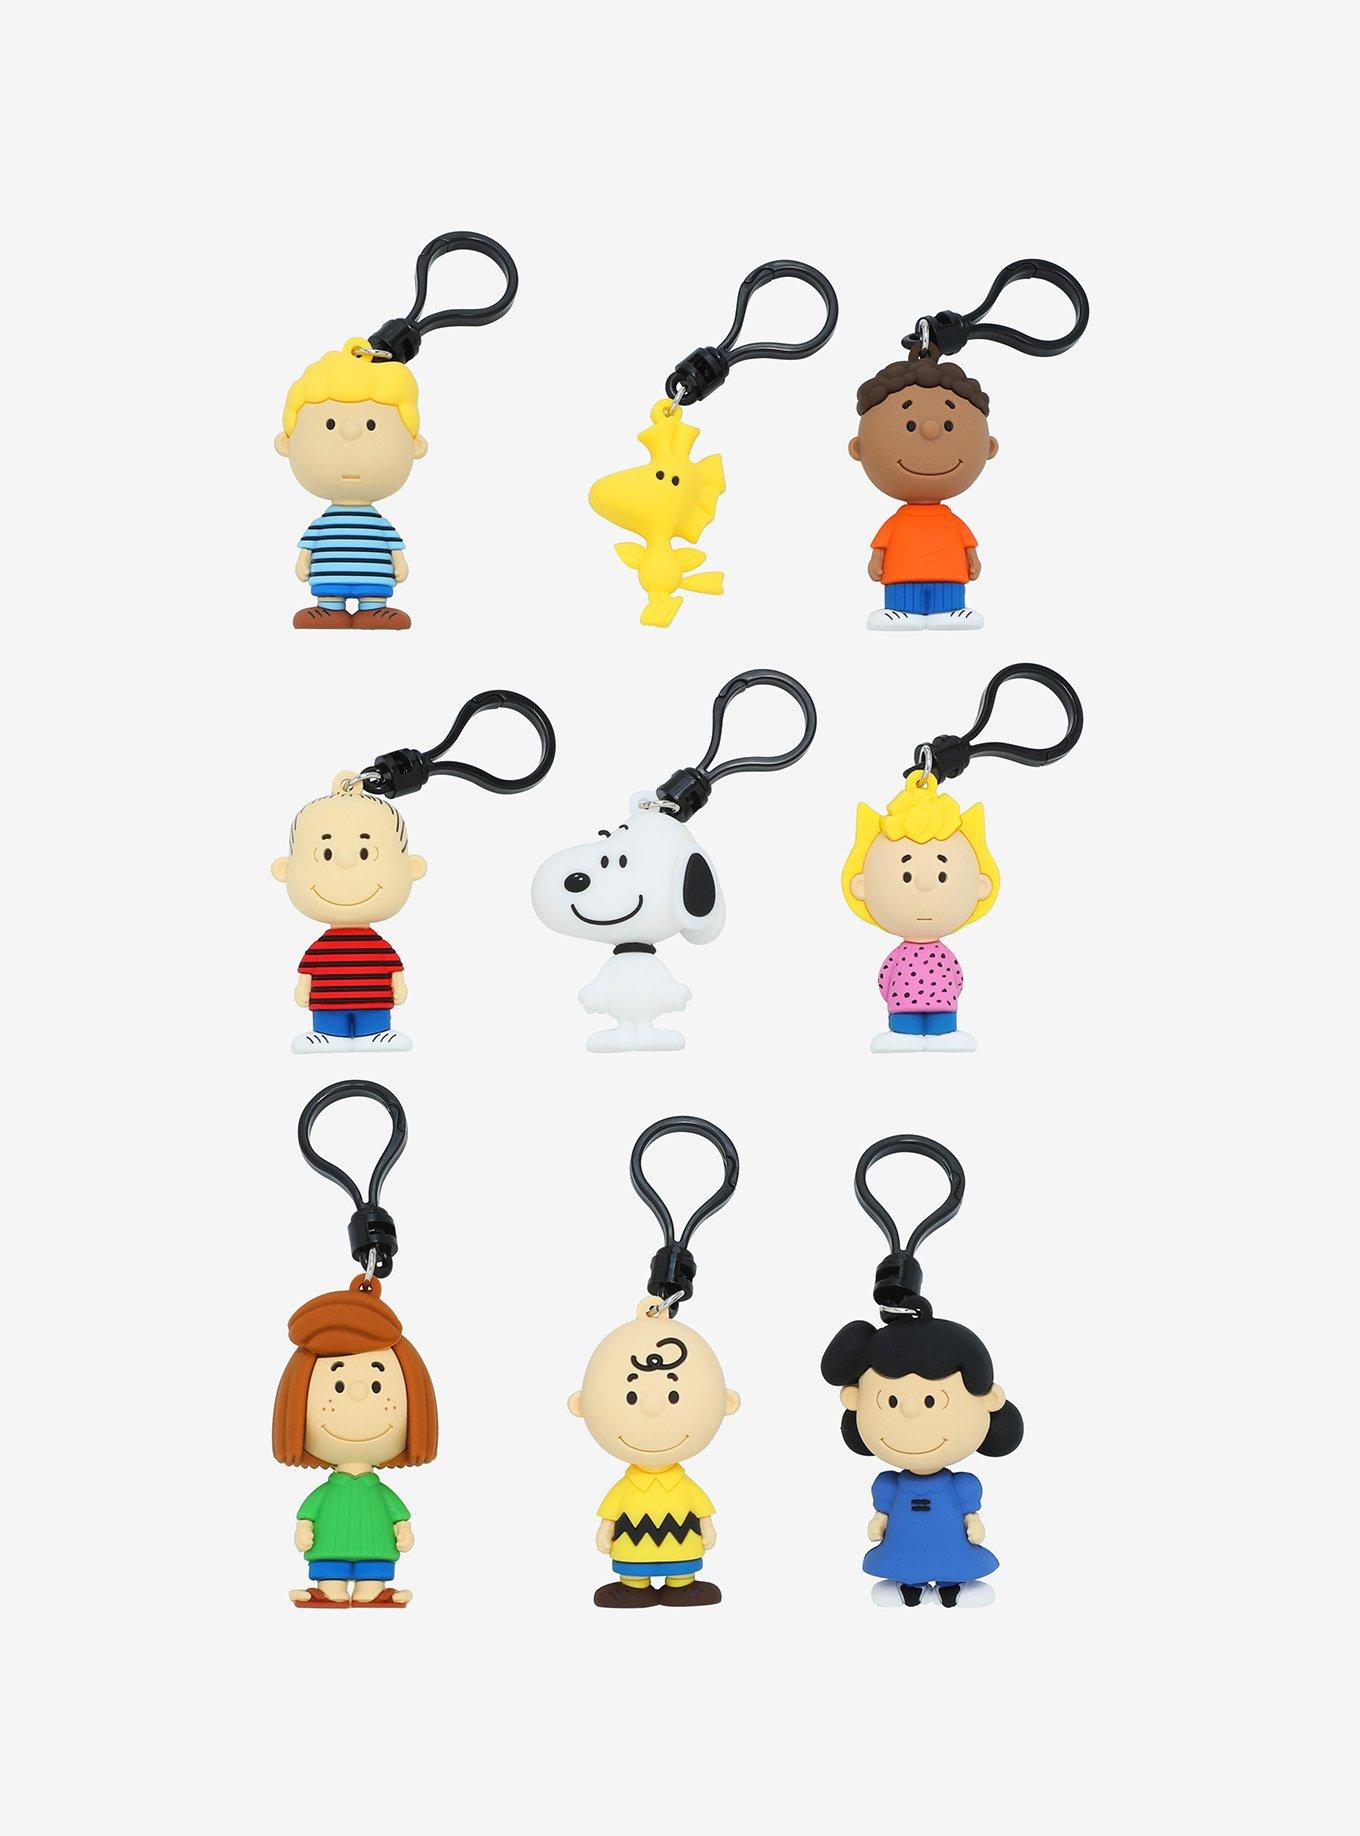 A snoopy keychain that I got from this store named Difa. Just now :  r/peanuts